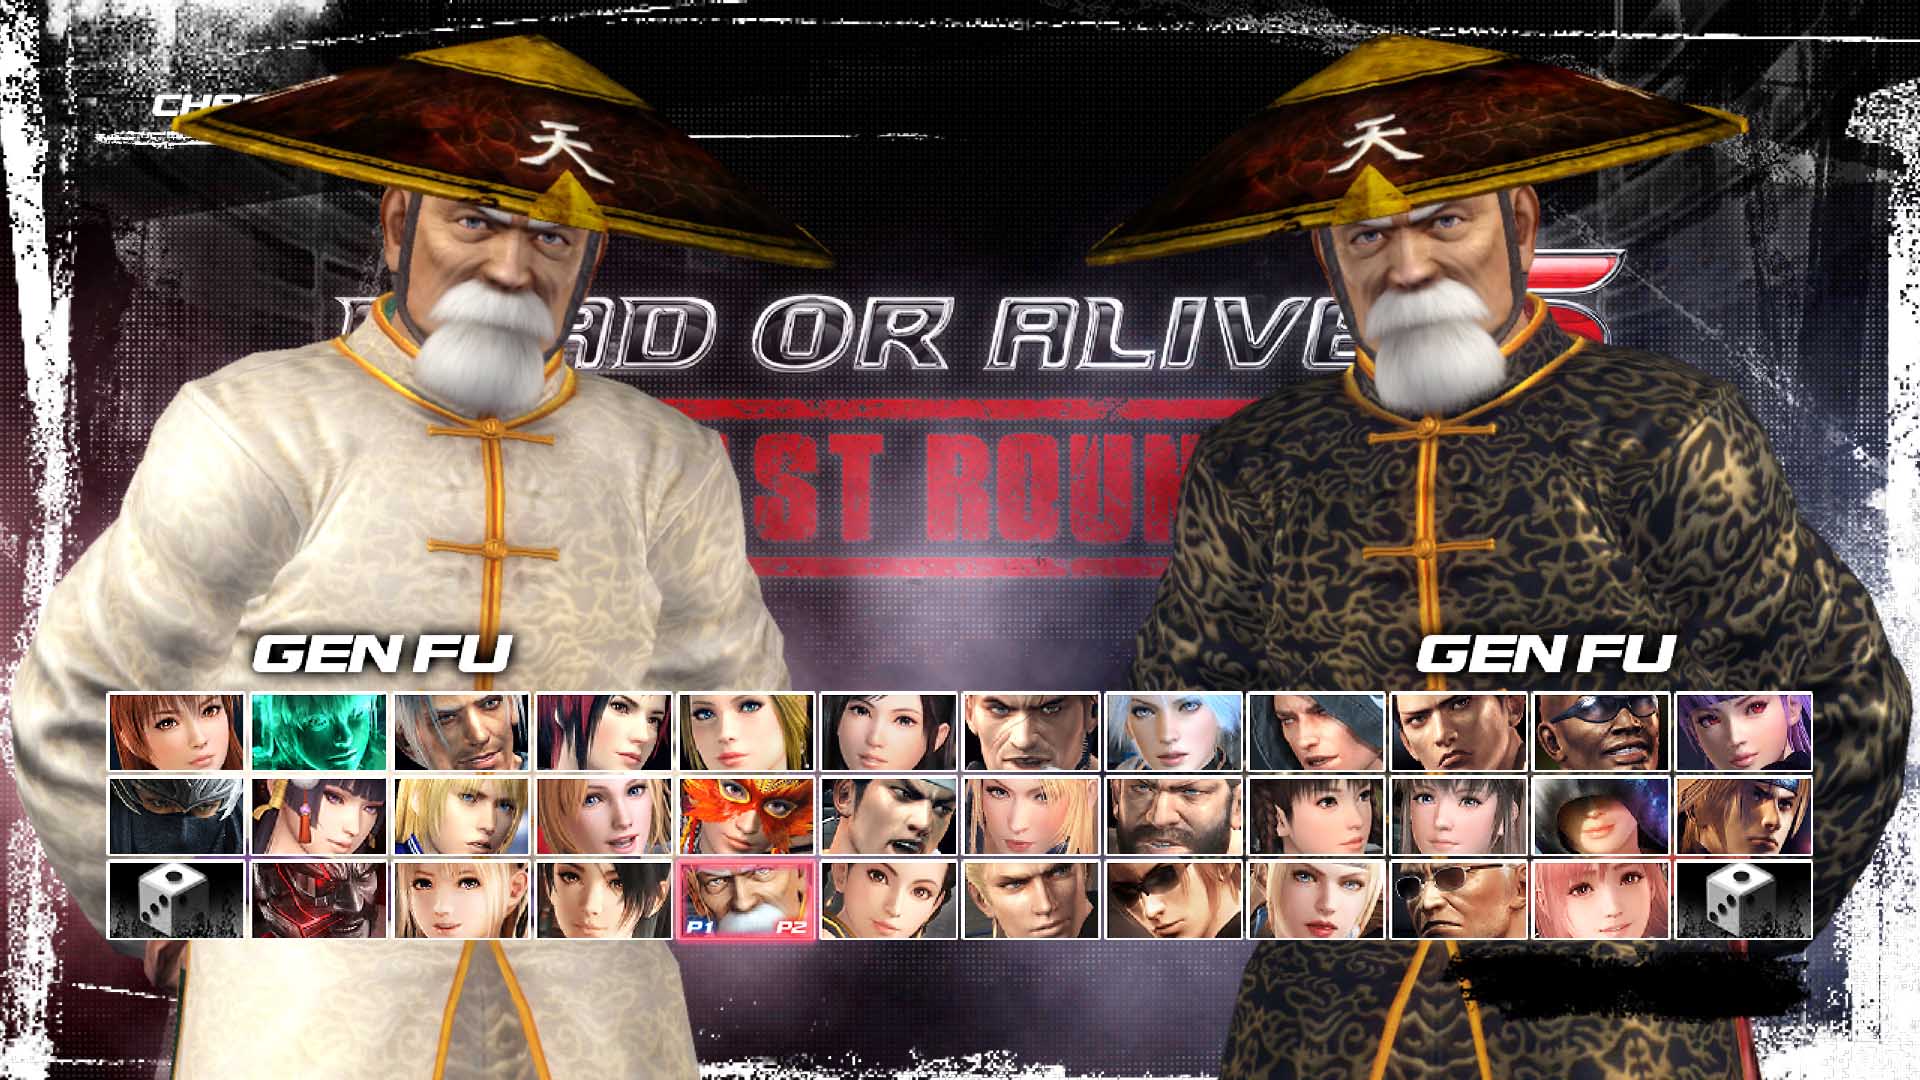 download free dead or alive 5 last round core fighters